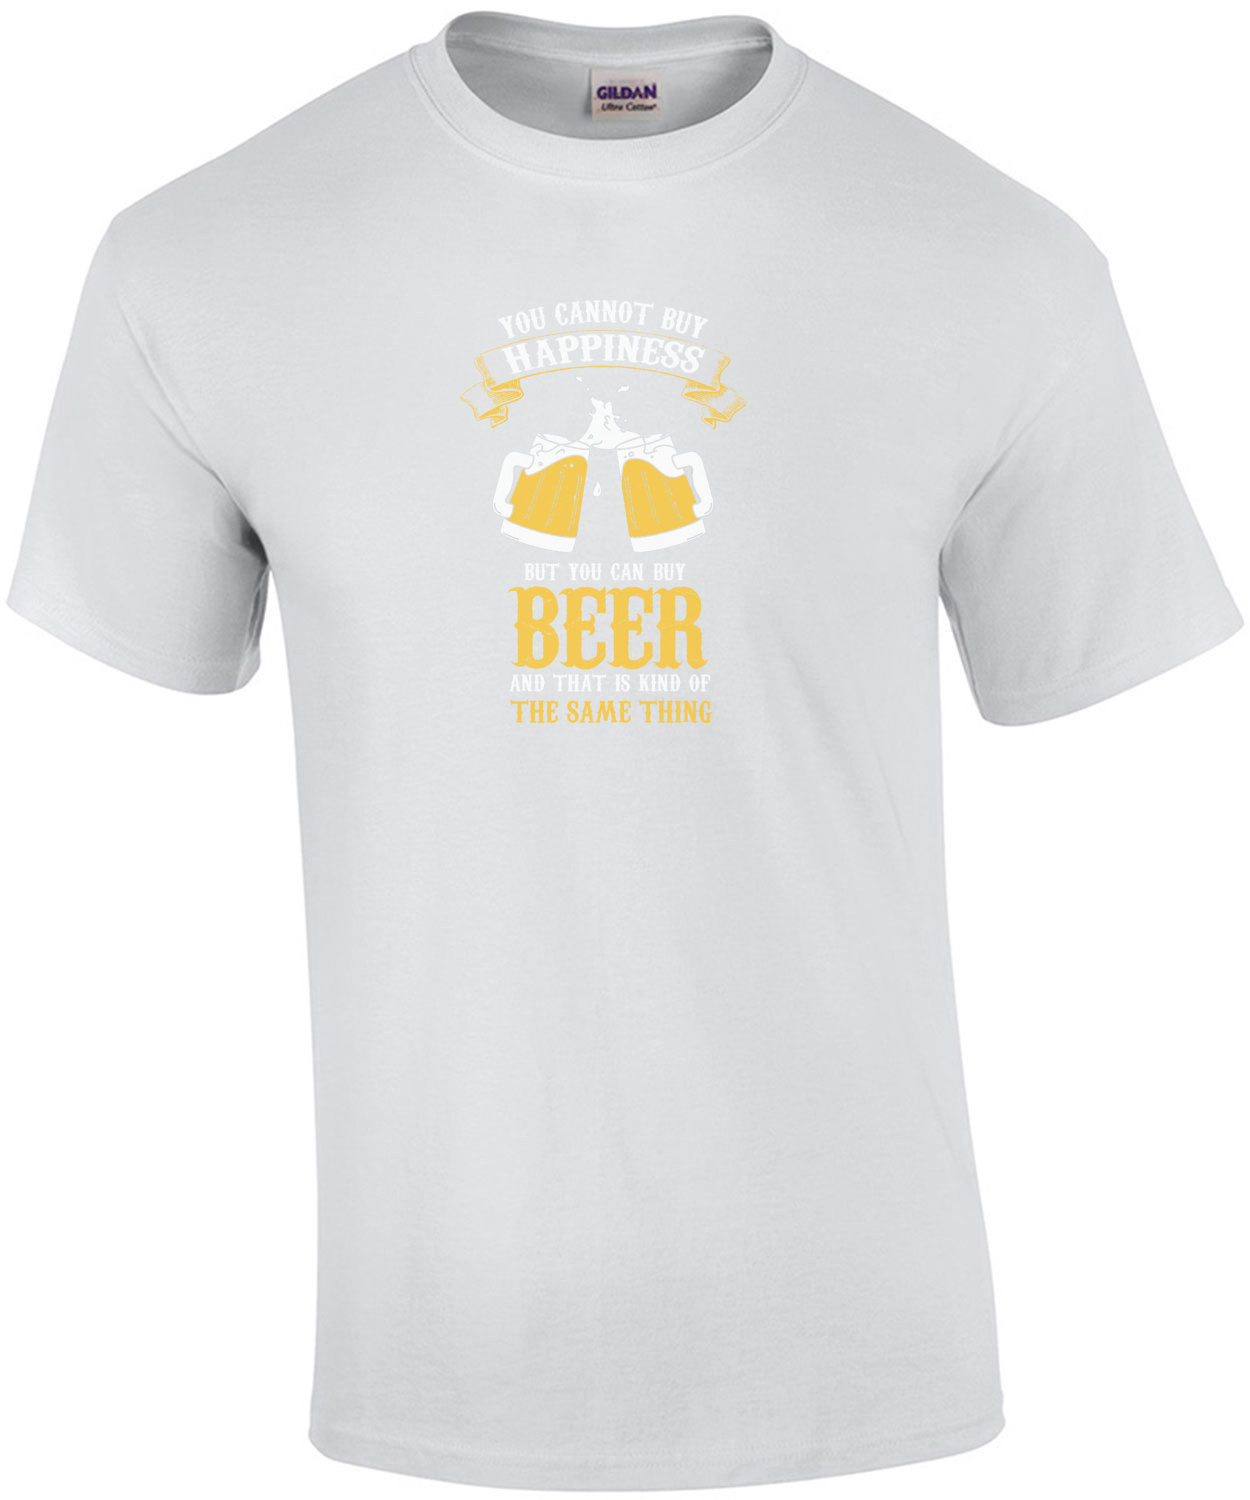 You Cannot Buy Happiness But You  Can Buy Beer T-Shirt